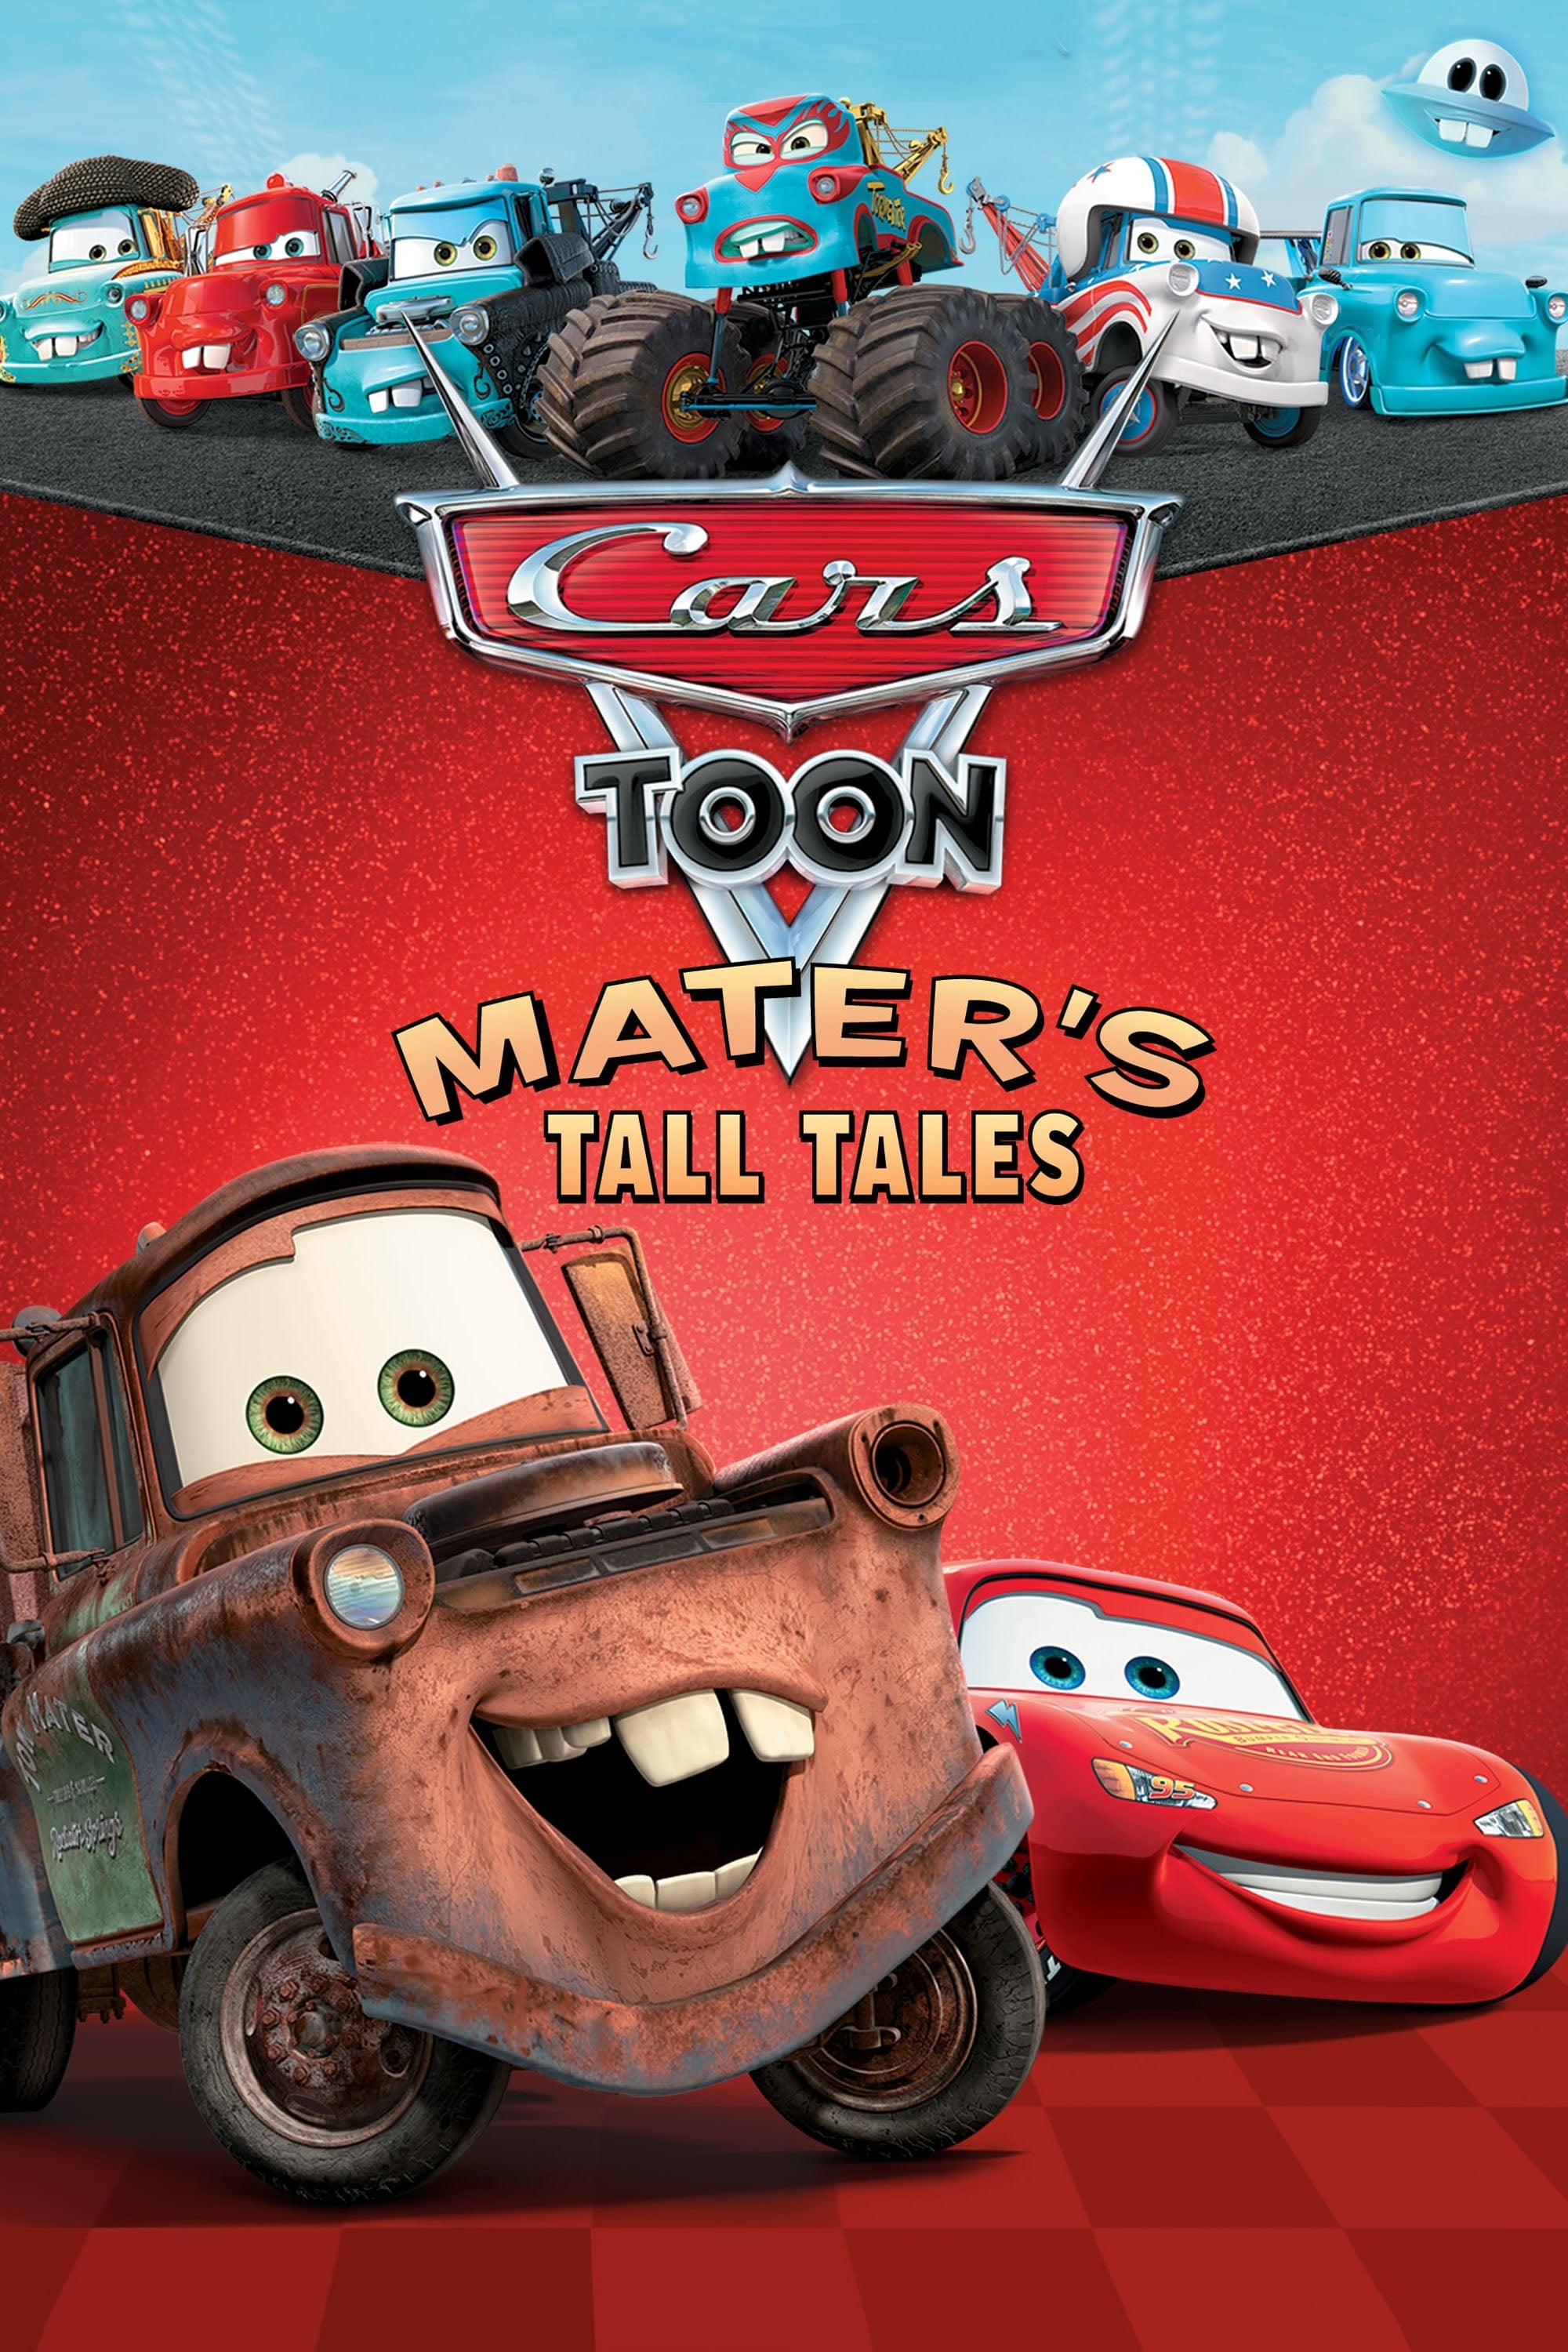 Cars Toon Mater's Tall Tales (2010)